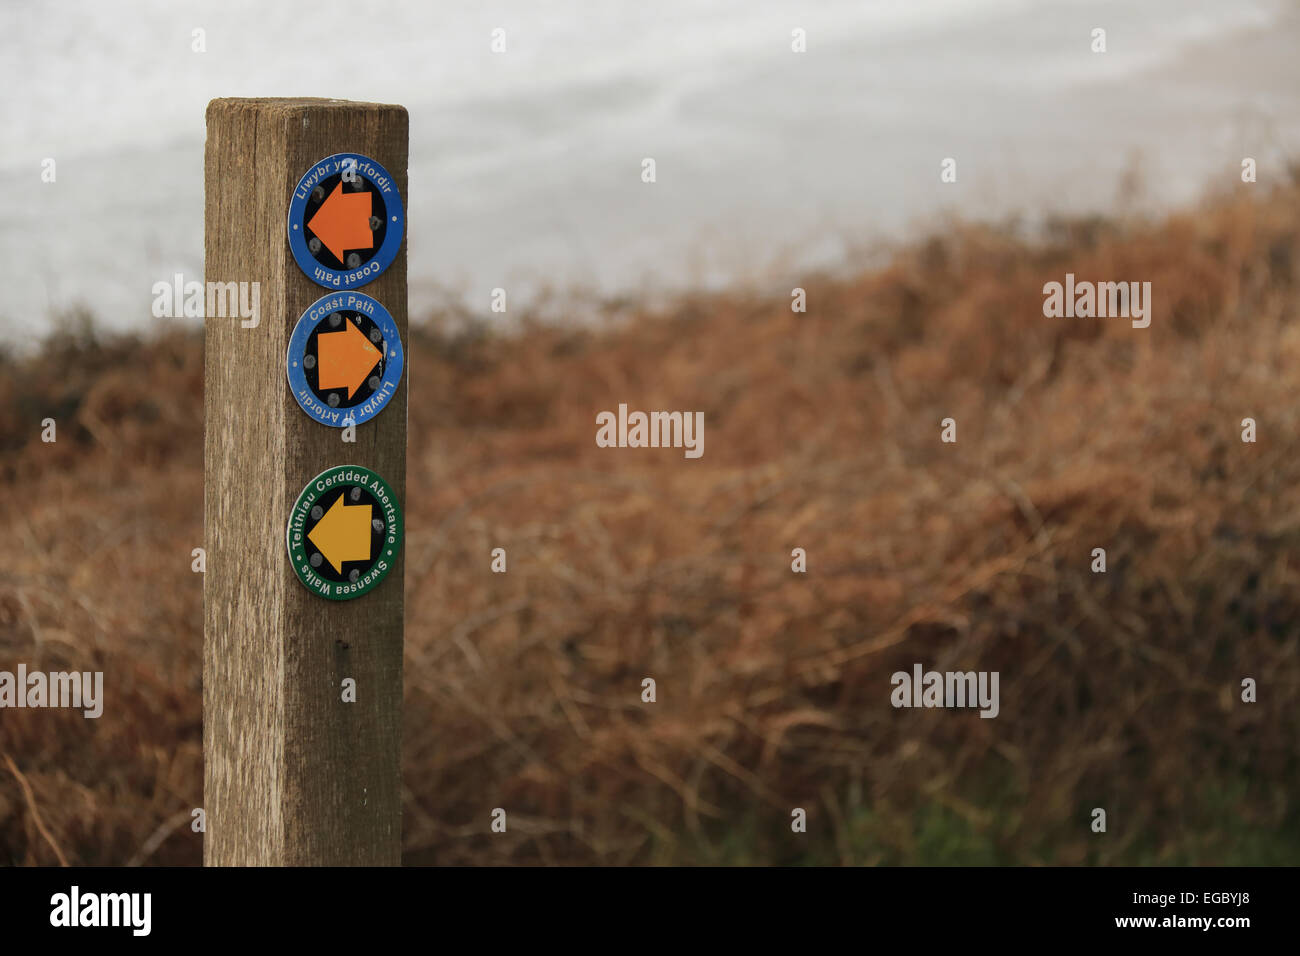 Wales Coast Path wooden sign post Stock Photo